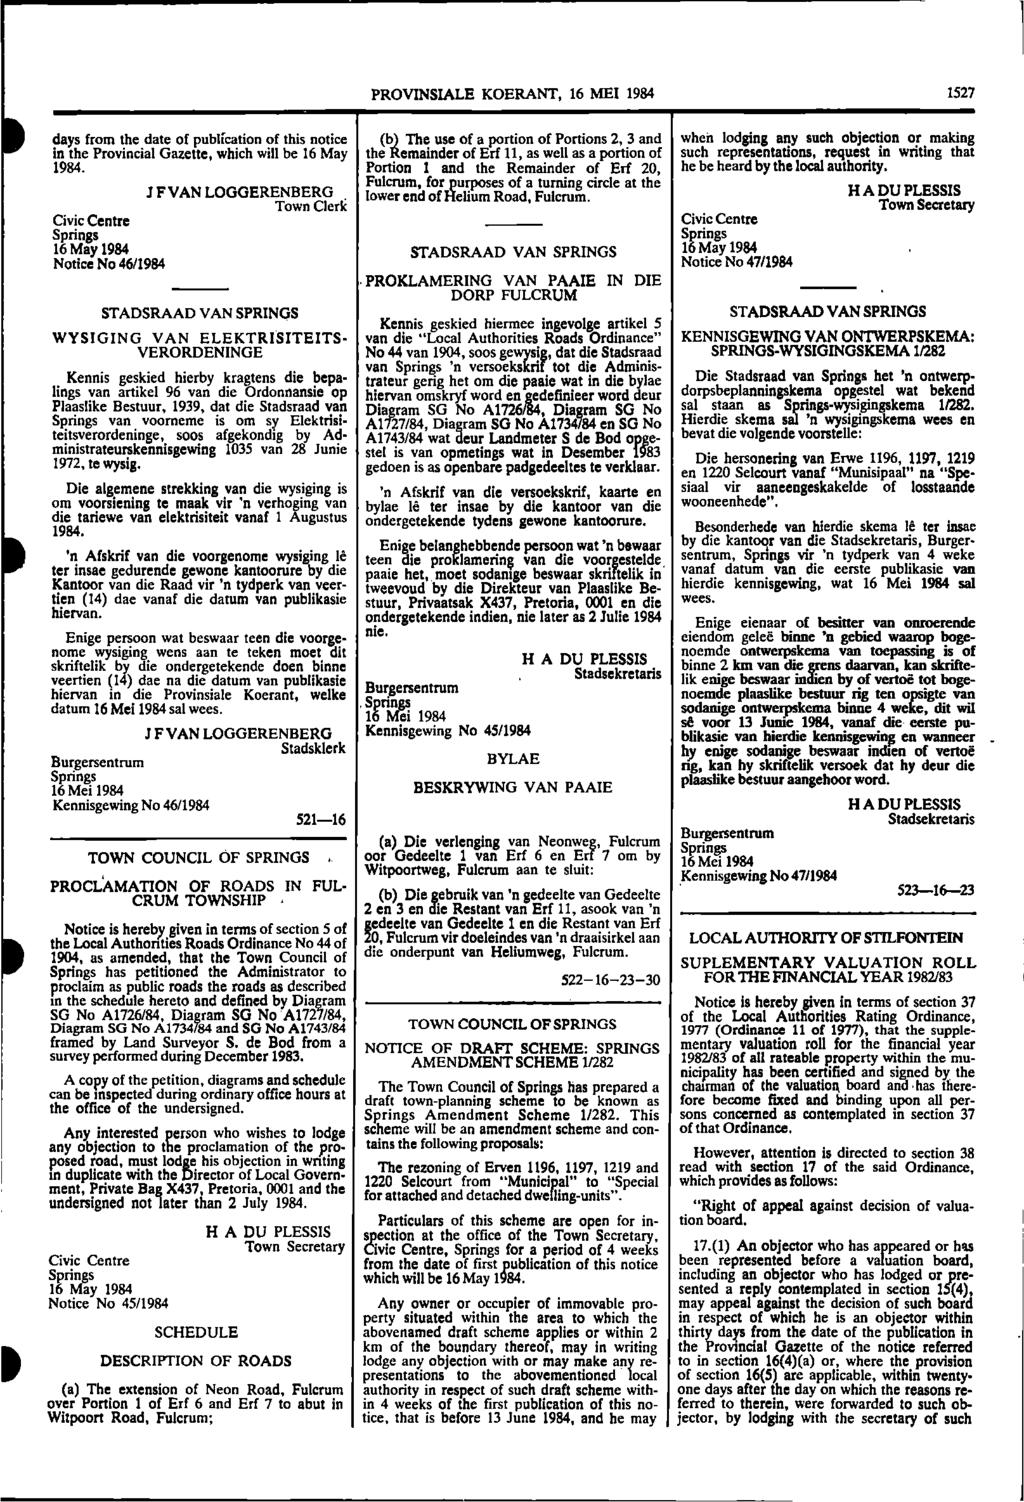 PROVINSIALE KOERANT, 16 MEI 1984 1527 days from the date of publication of this notice in the Provincial Gazette, which will be 16 May 1984.